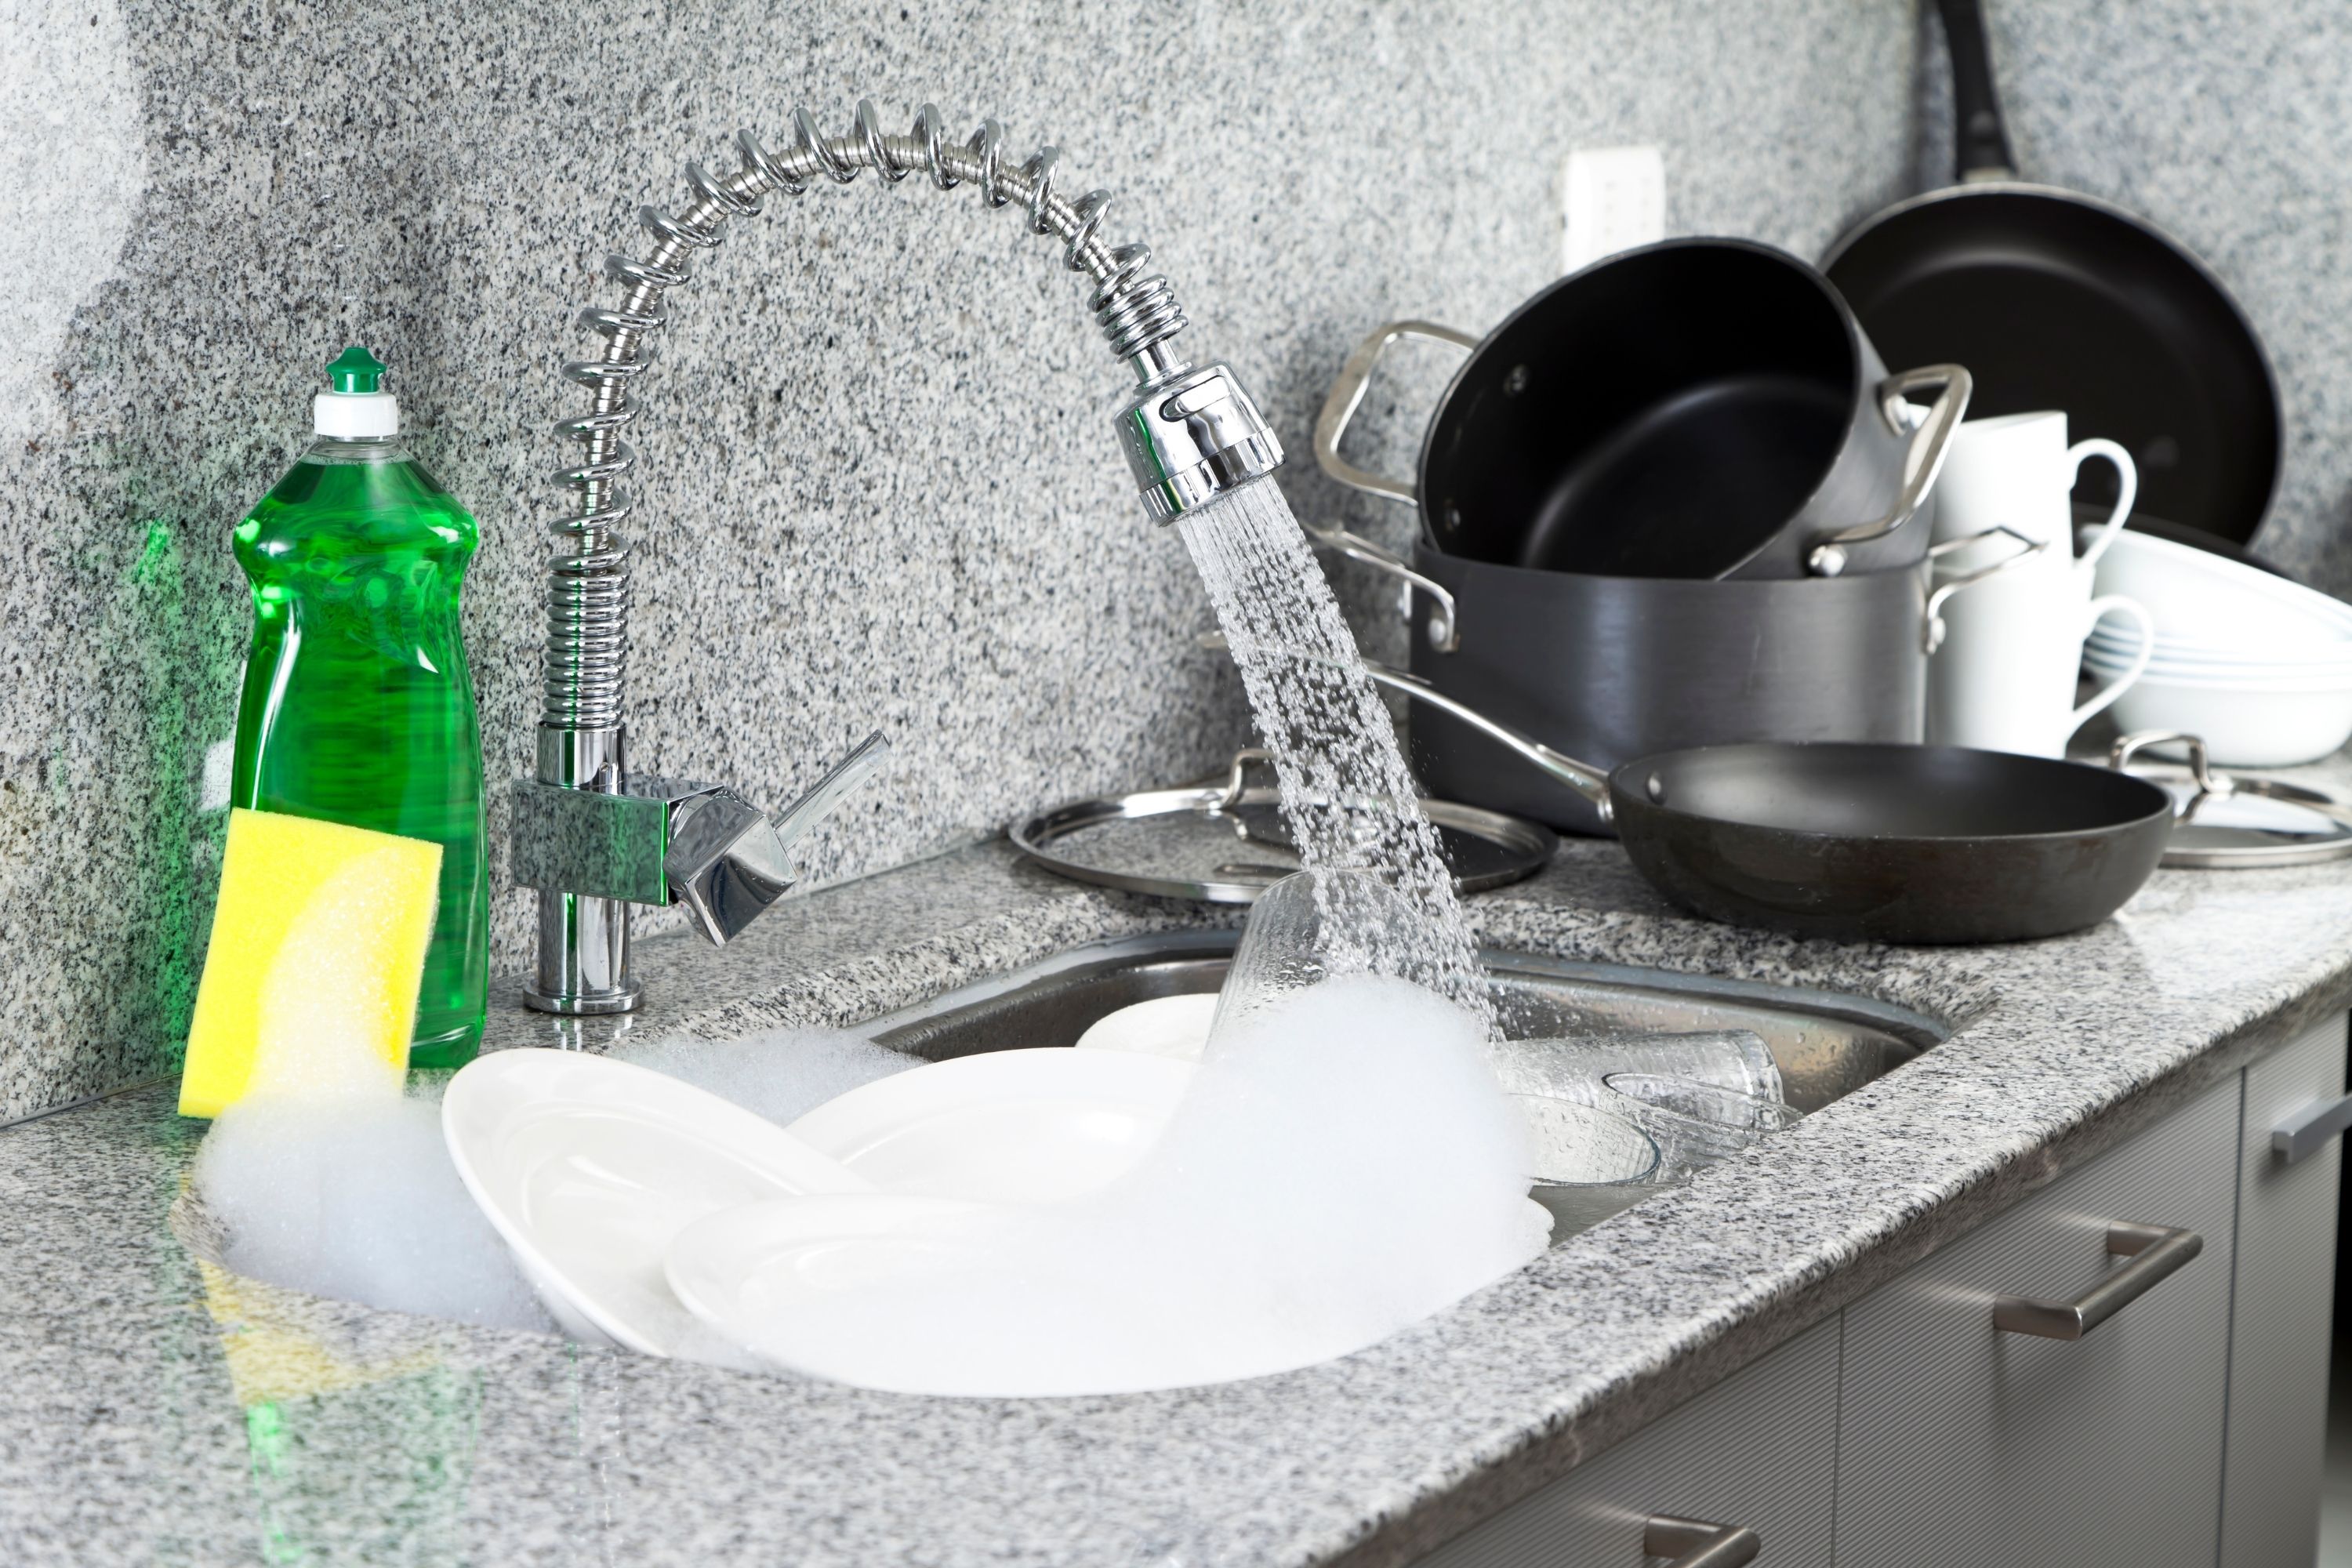 How Do I Sanitize Kitchen Surfaces By Hand